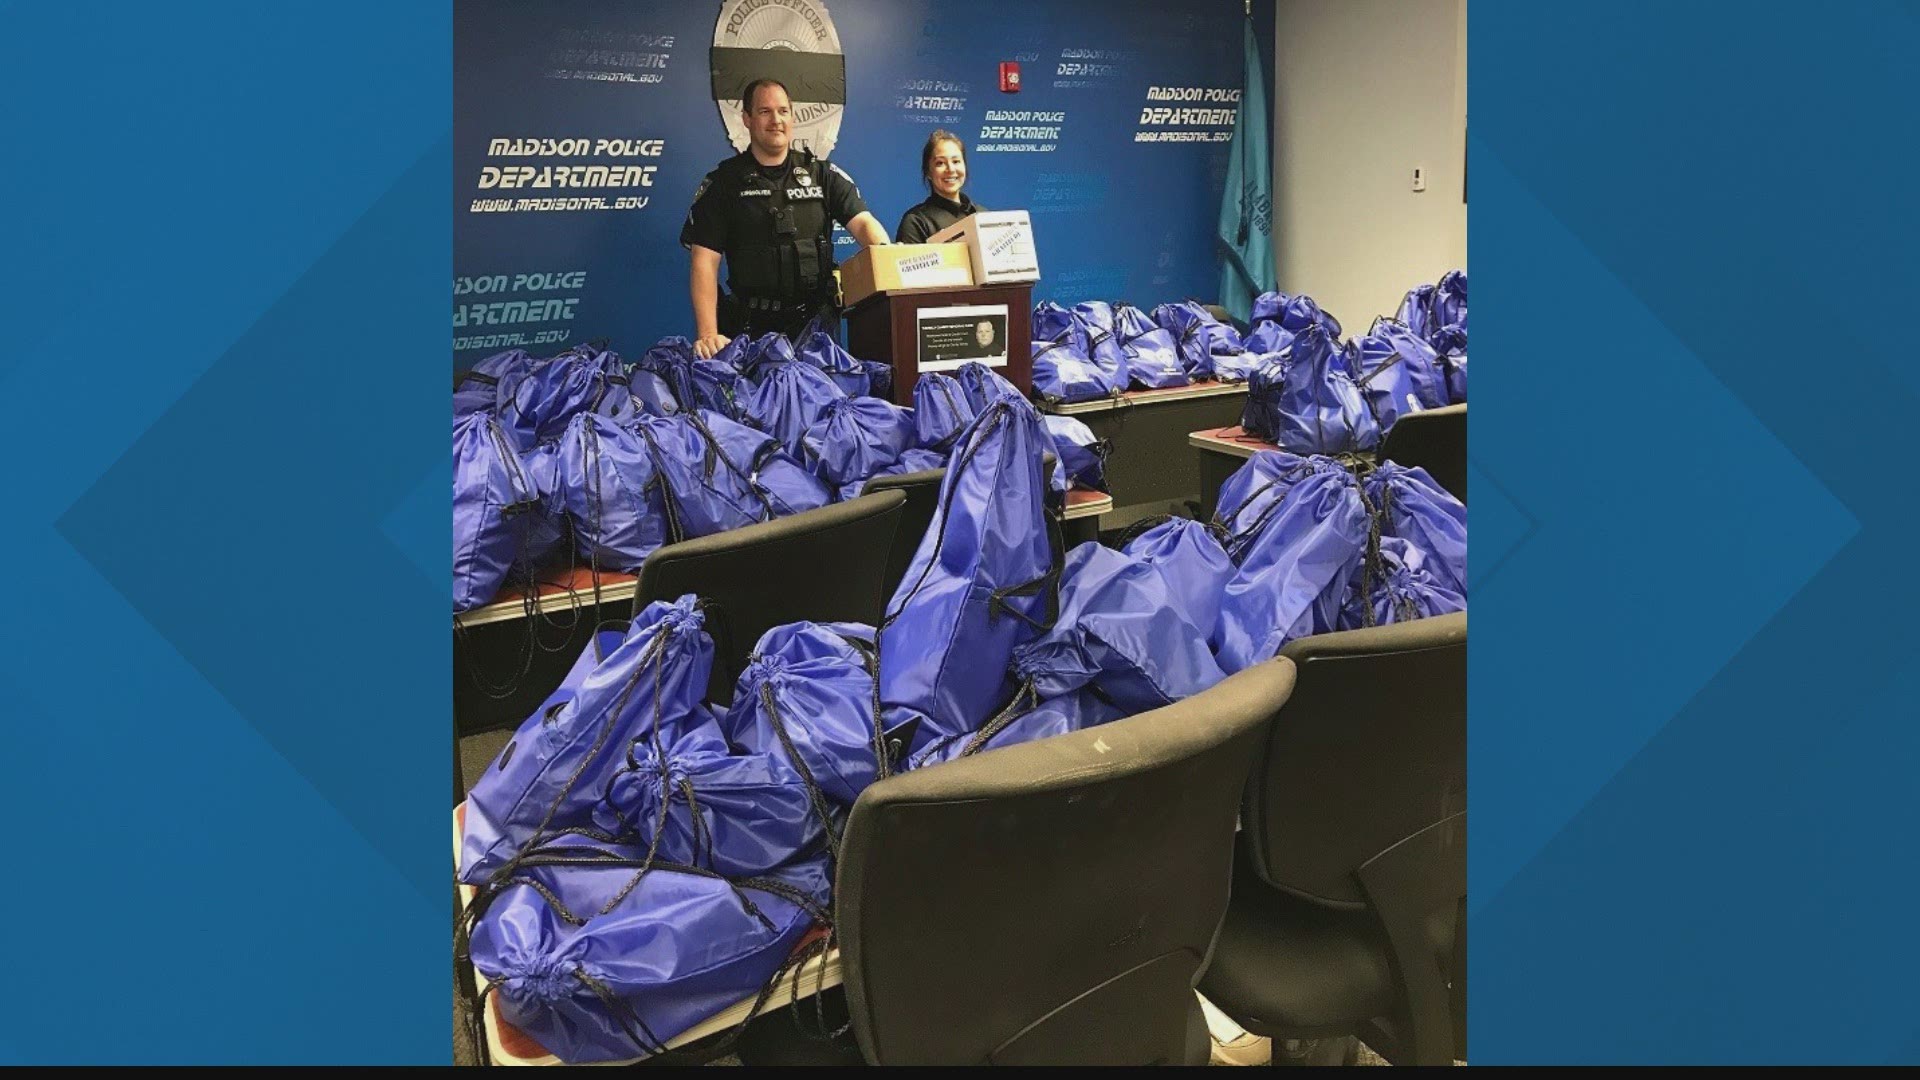 Lockheed Martin and Operation Gratitude delivered the goodie bags, which included cards and letters from all over the country.